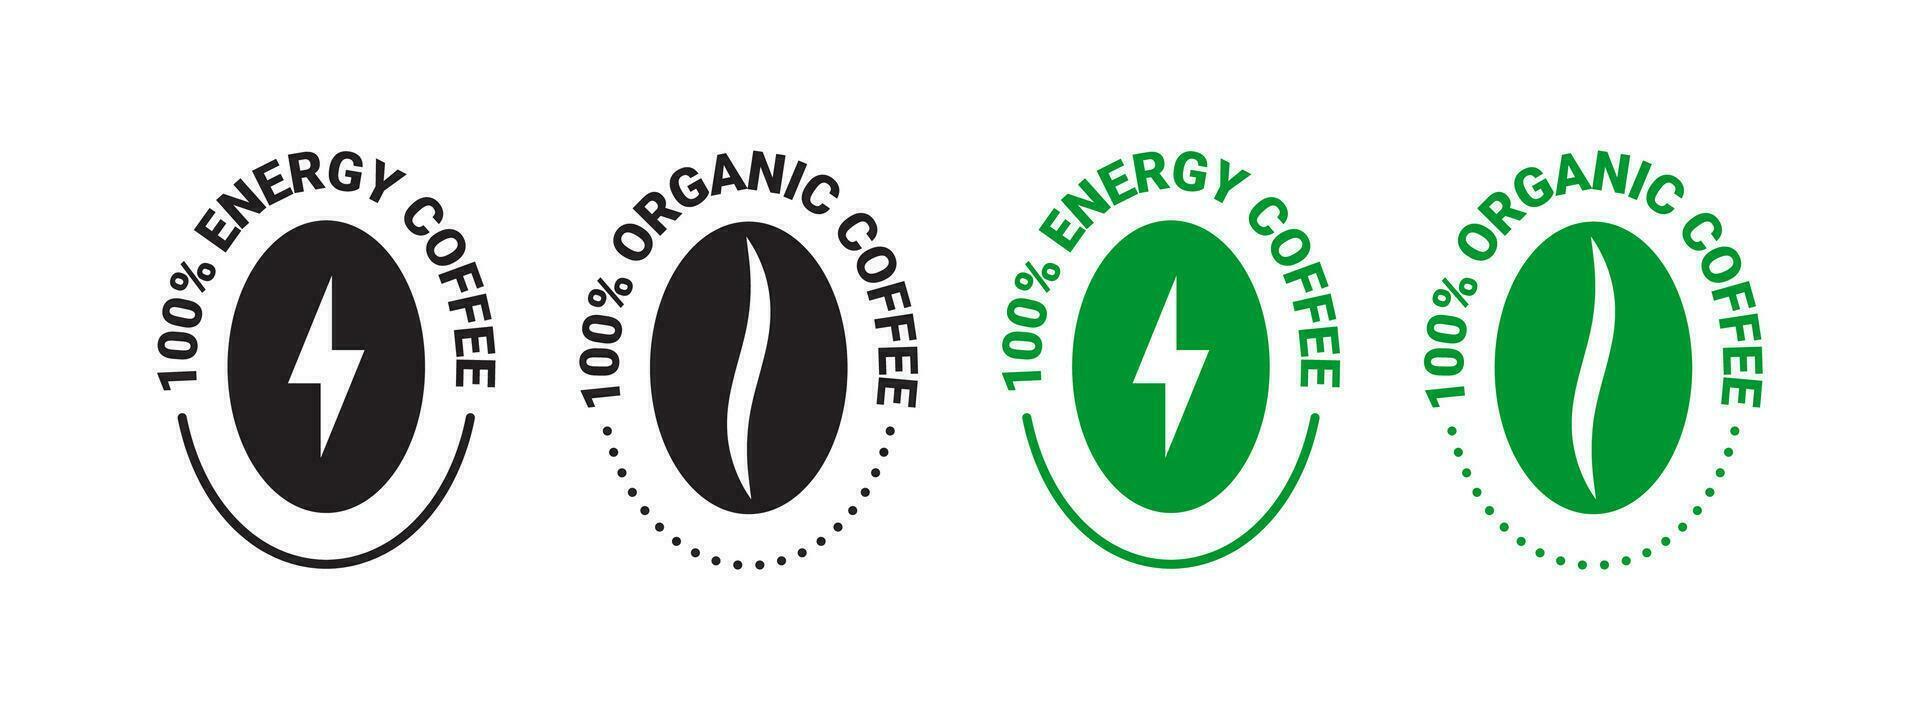 Coffee beans. Organic and energy coffee. Badges and labels. Vector scalable graphics